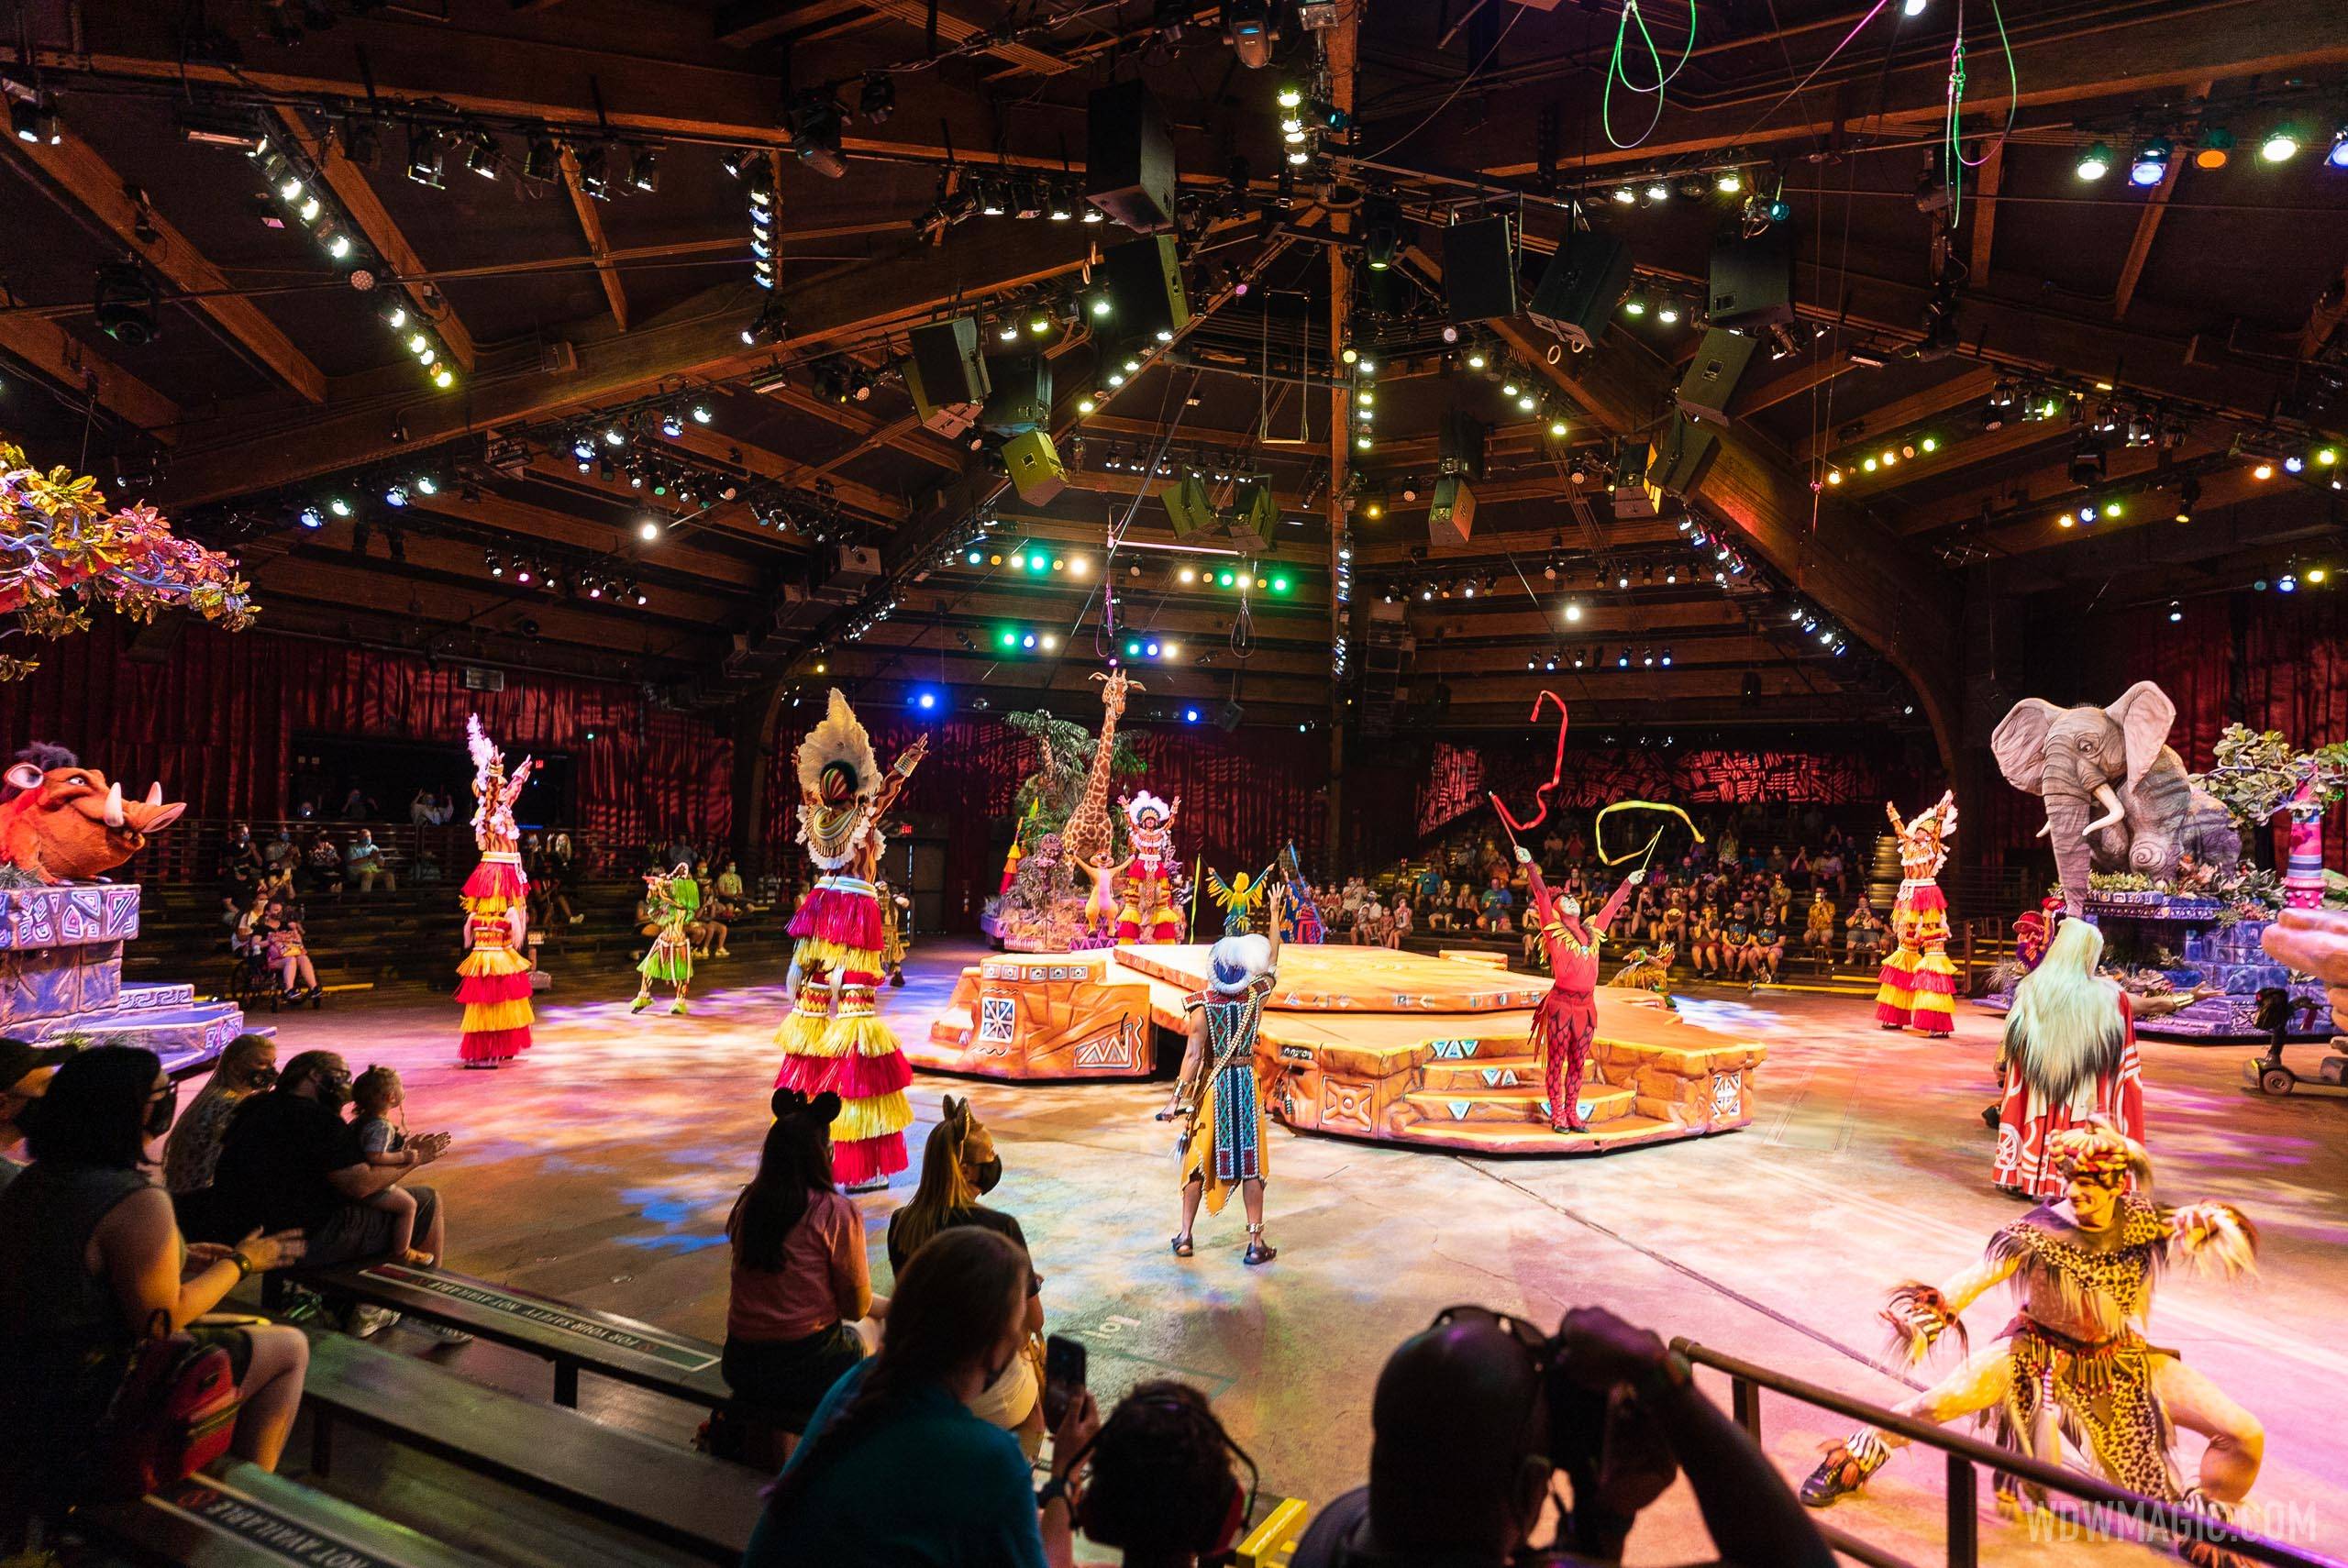 Festival of the Lion King reopened last week with 6ft physical distancing, that is now reduced to 3ft